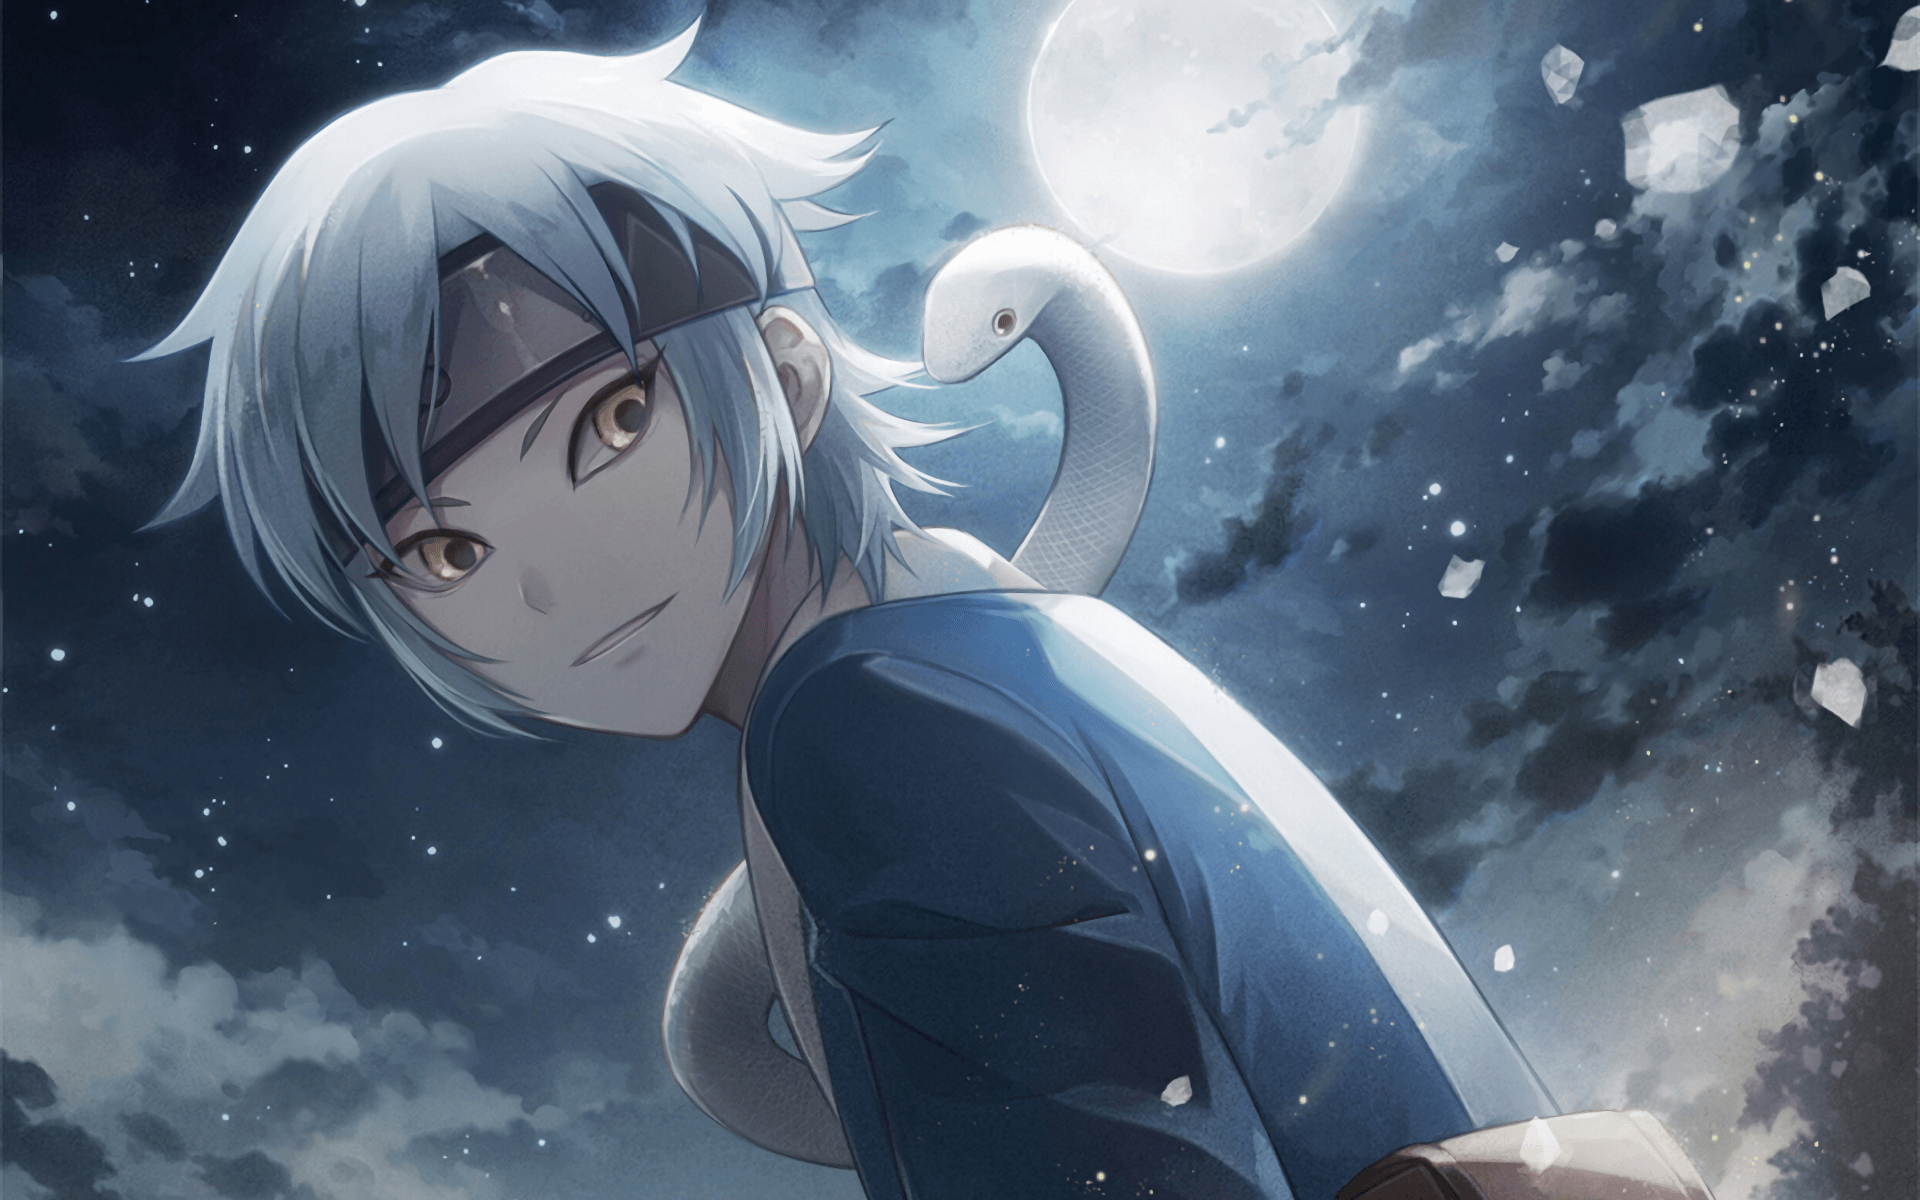 Mitsuki Boruto Wallpaper: HD, 4K, 5K for PC and Mobile. Download free image for iPhone, Android